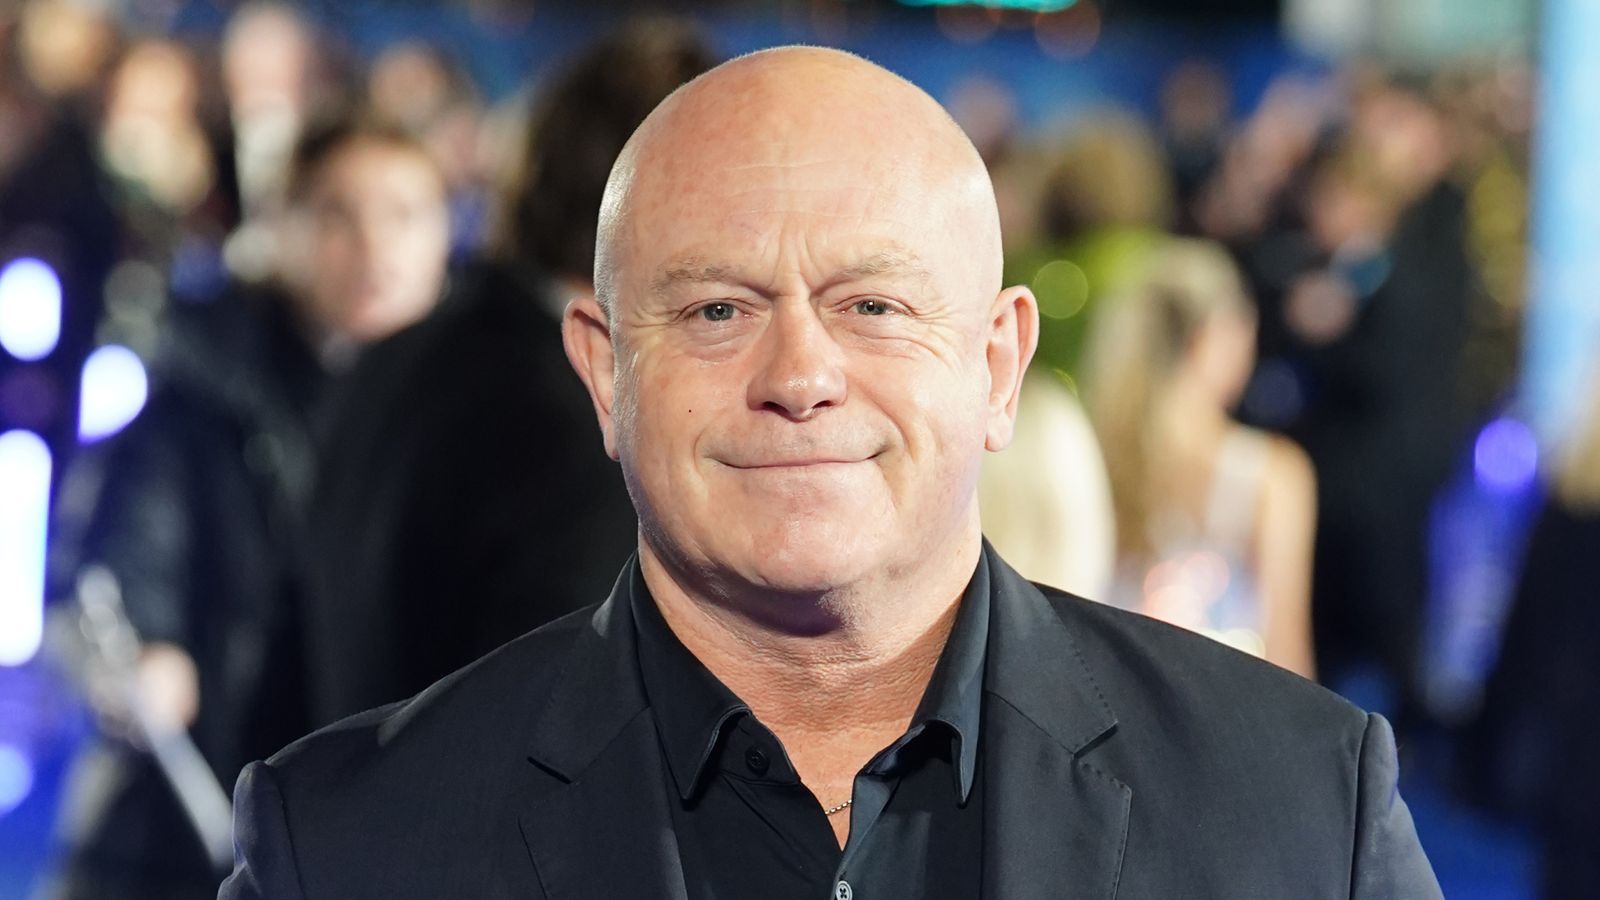 Ross Kemp turned down OceanGate submersible trip to Titanic wreck over safety fears